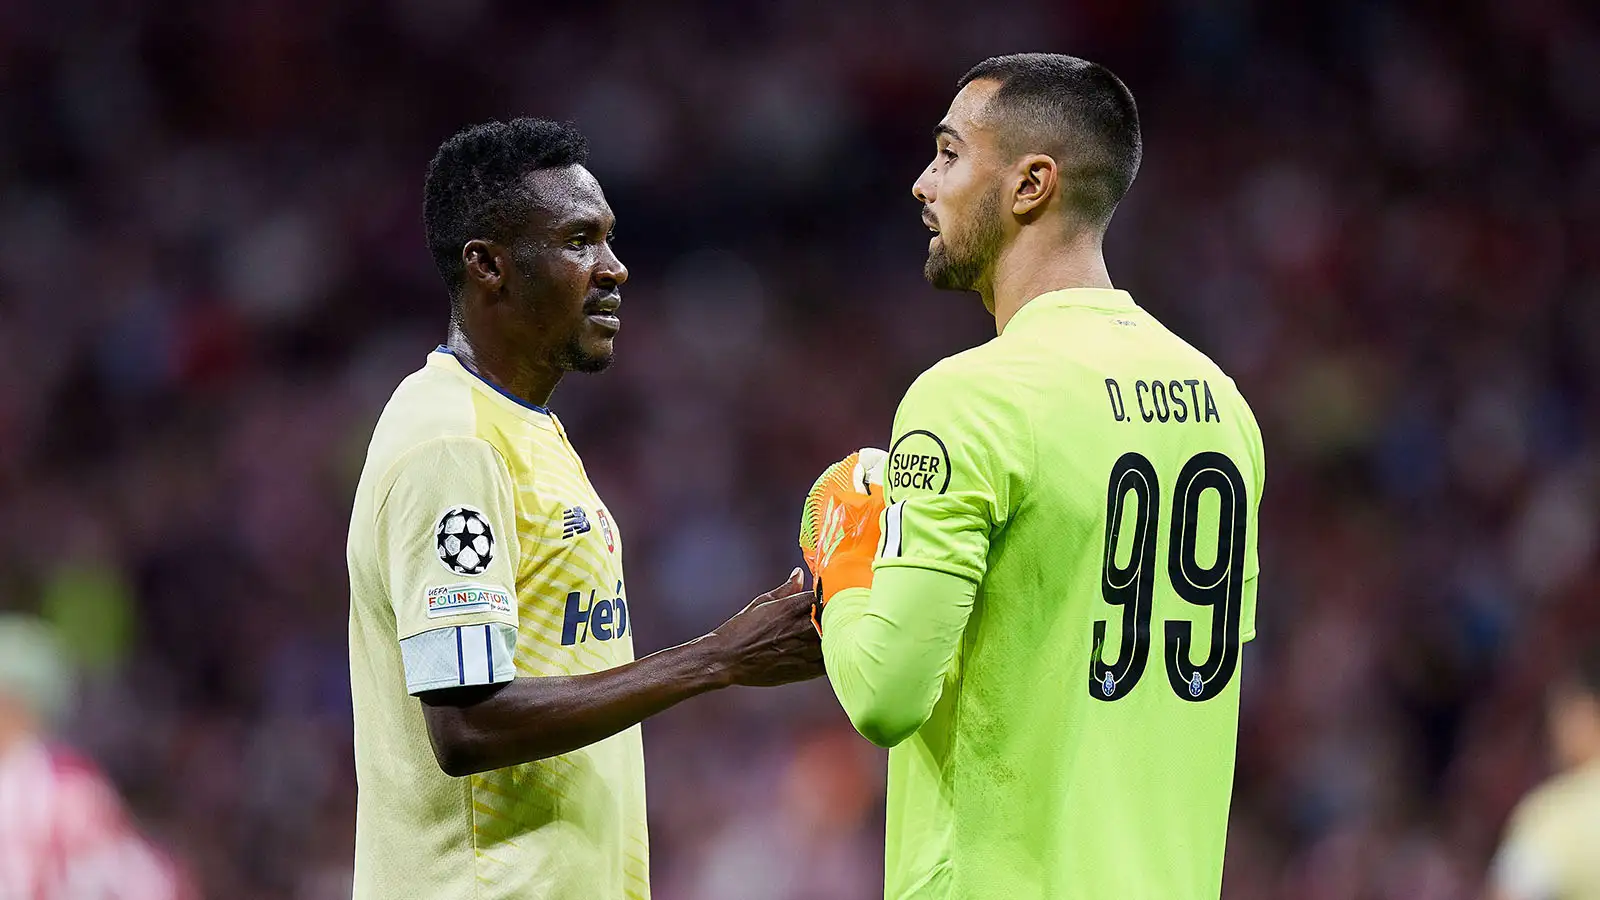 Zaidu Sanusi and Diogo Costa of Porto FC during the UEFA Champions League match between Atletico de Madrid and Porto